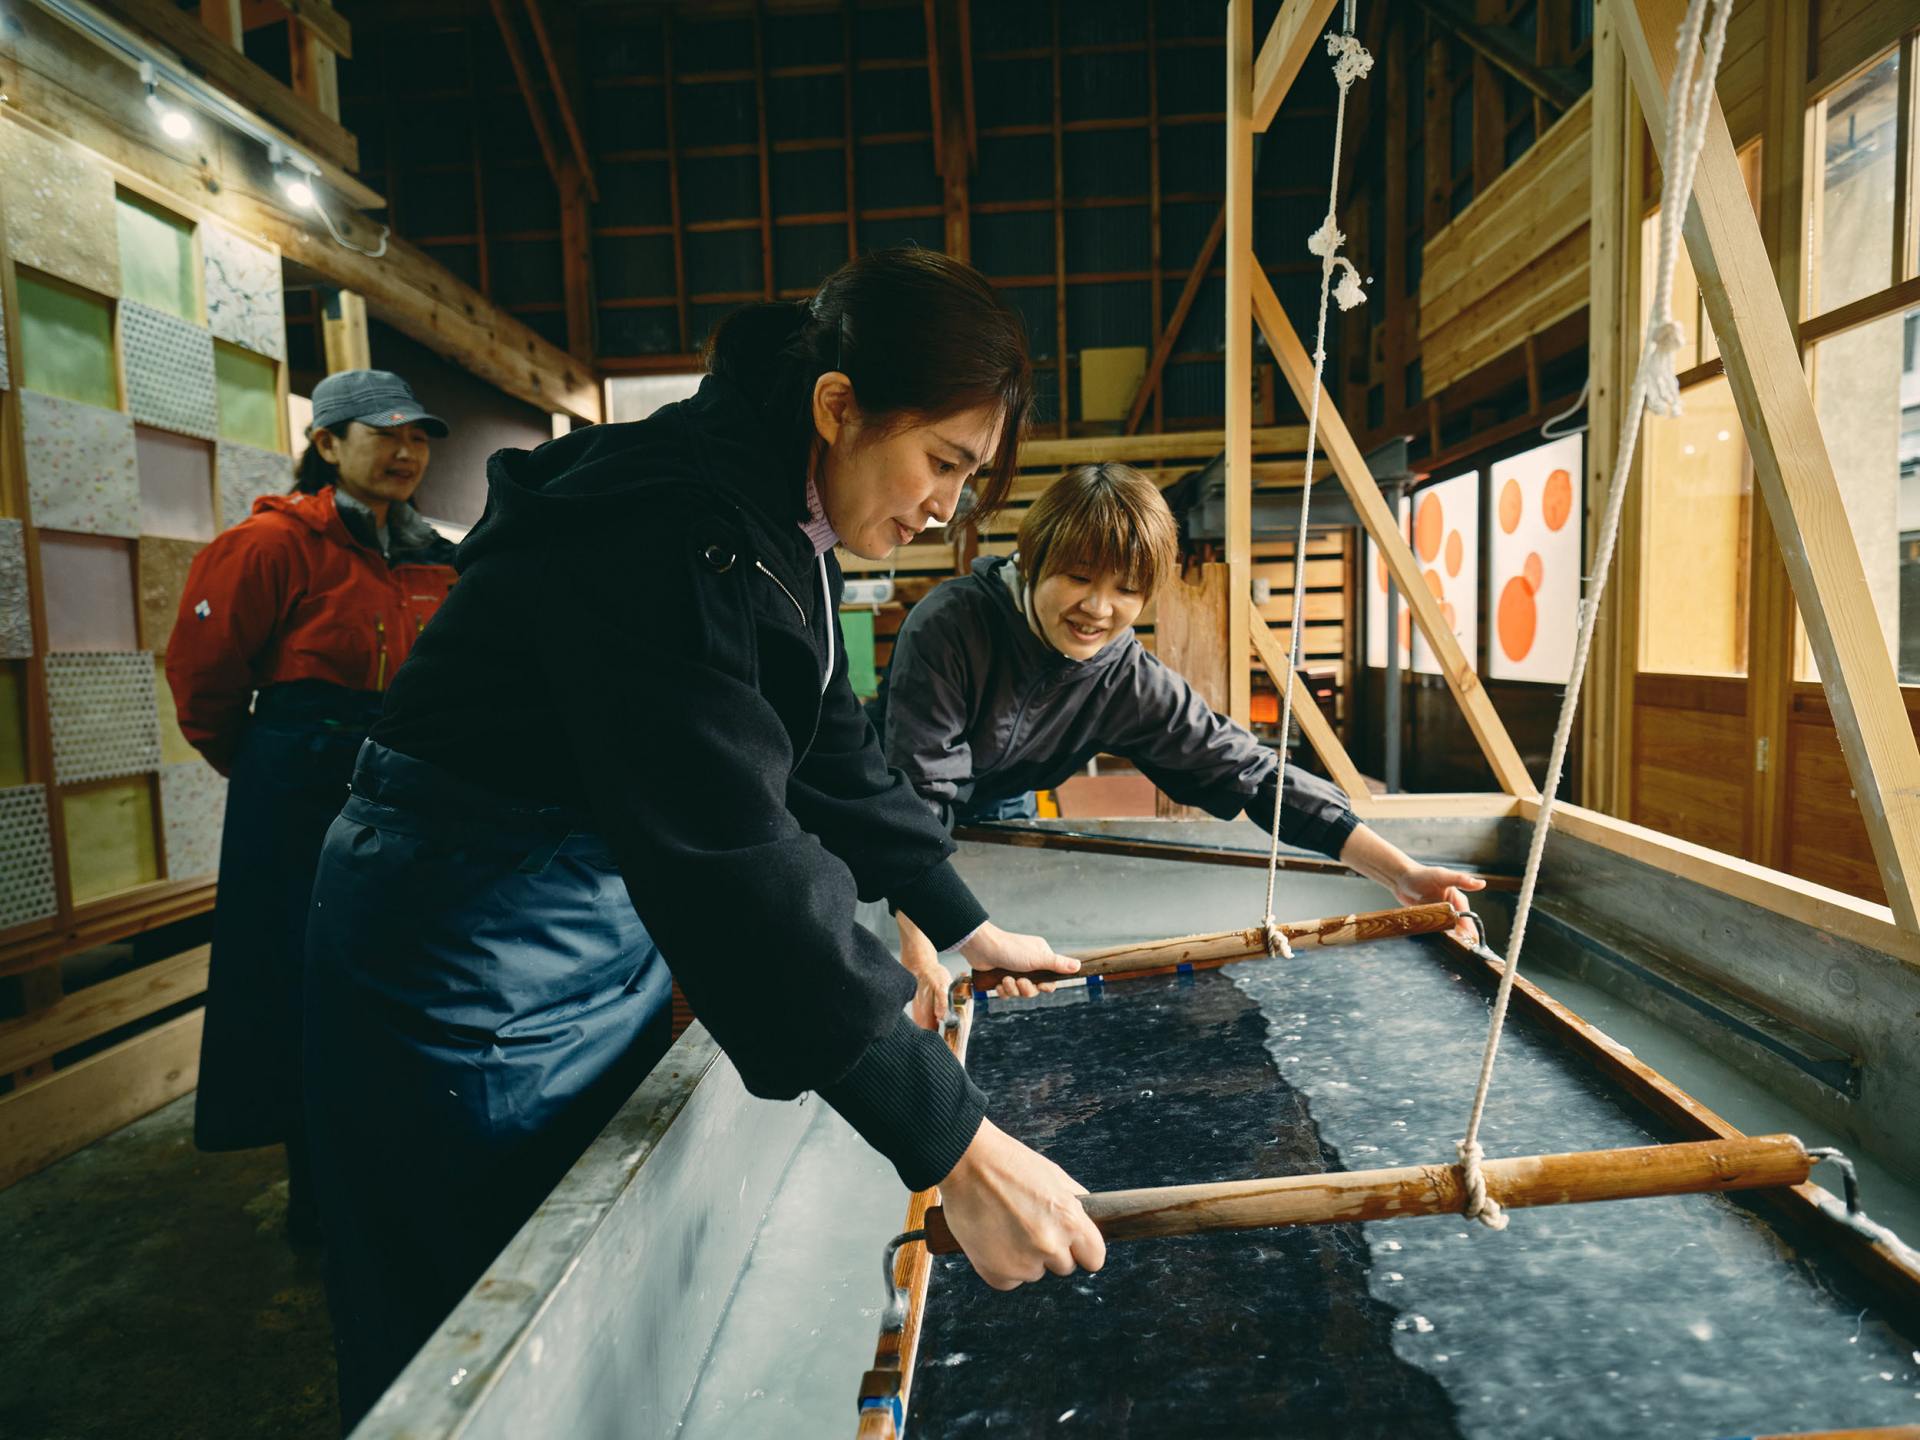 Private Echizen Washi Paper Making Experience and Walking Tour